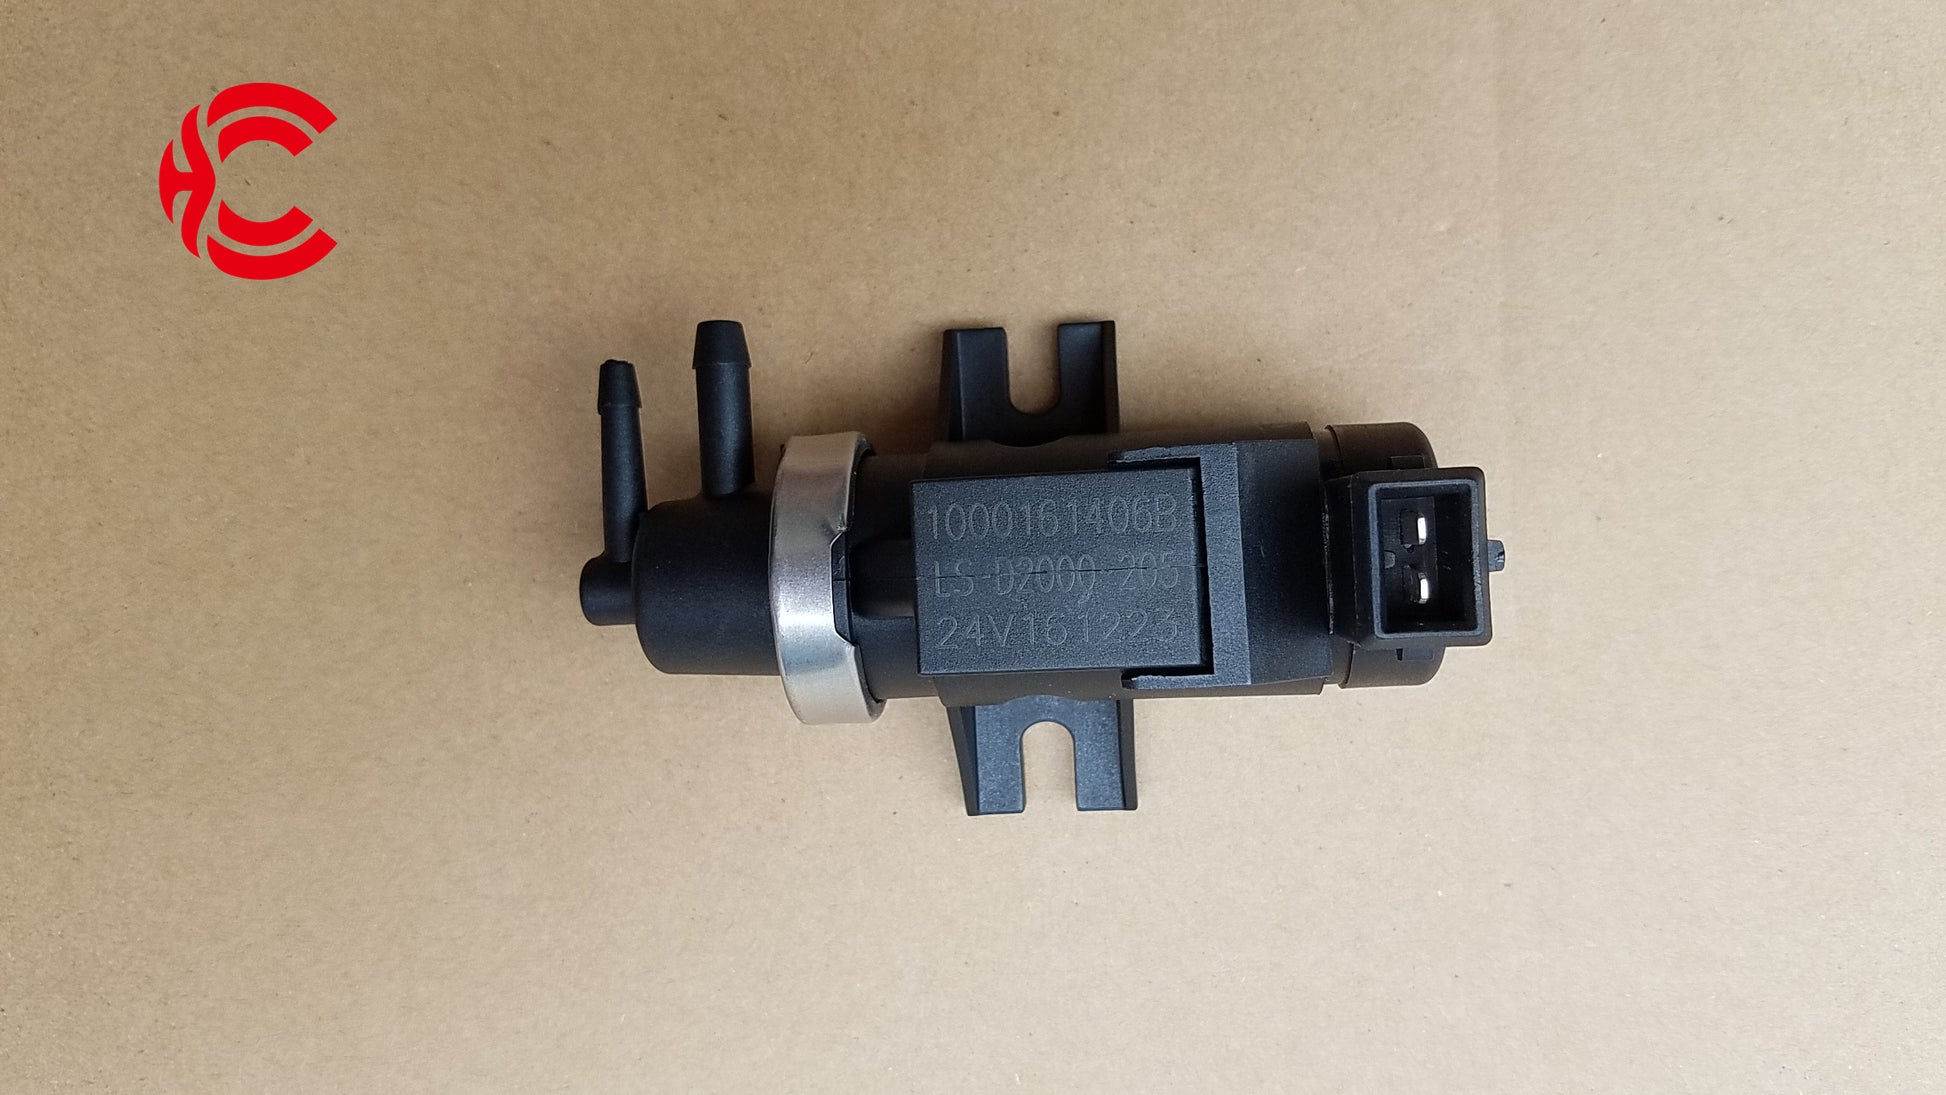 OEM: LS-D2000-205 24VMaterial: ABSColor: blackOrigin: Made in ChinaWeight: 150gPacking List: 1* Turbocharger VNT Solenoid Valve More ServiceWe can provide OEM Manufacturing serviceWe can Be your one-step solution for Auto PartsWe can provide technical scheme for you Feel Free to Contact Us, We will get back to you as soon as possible.